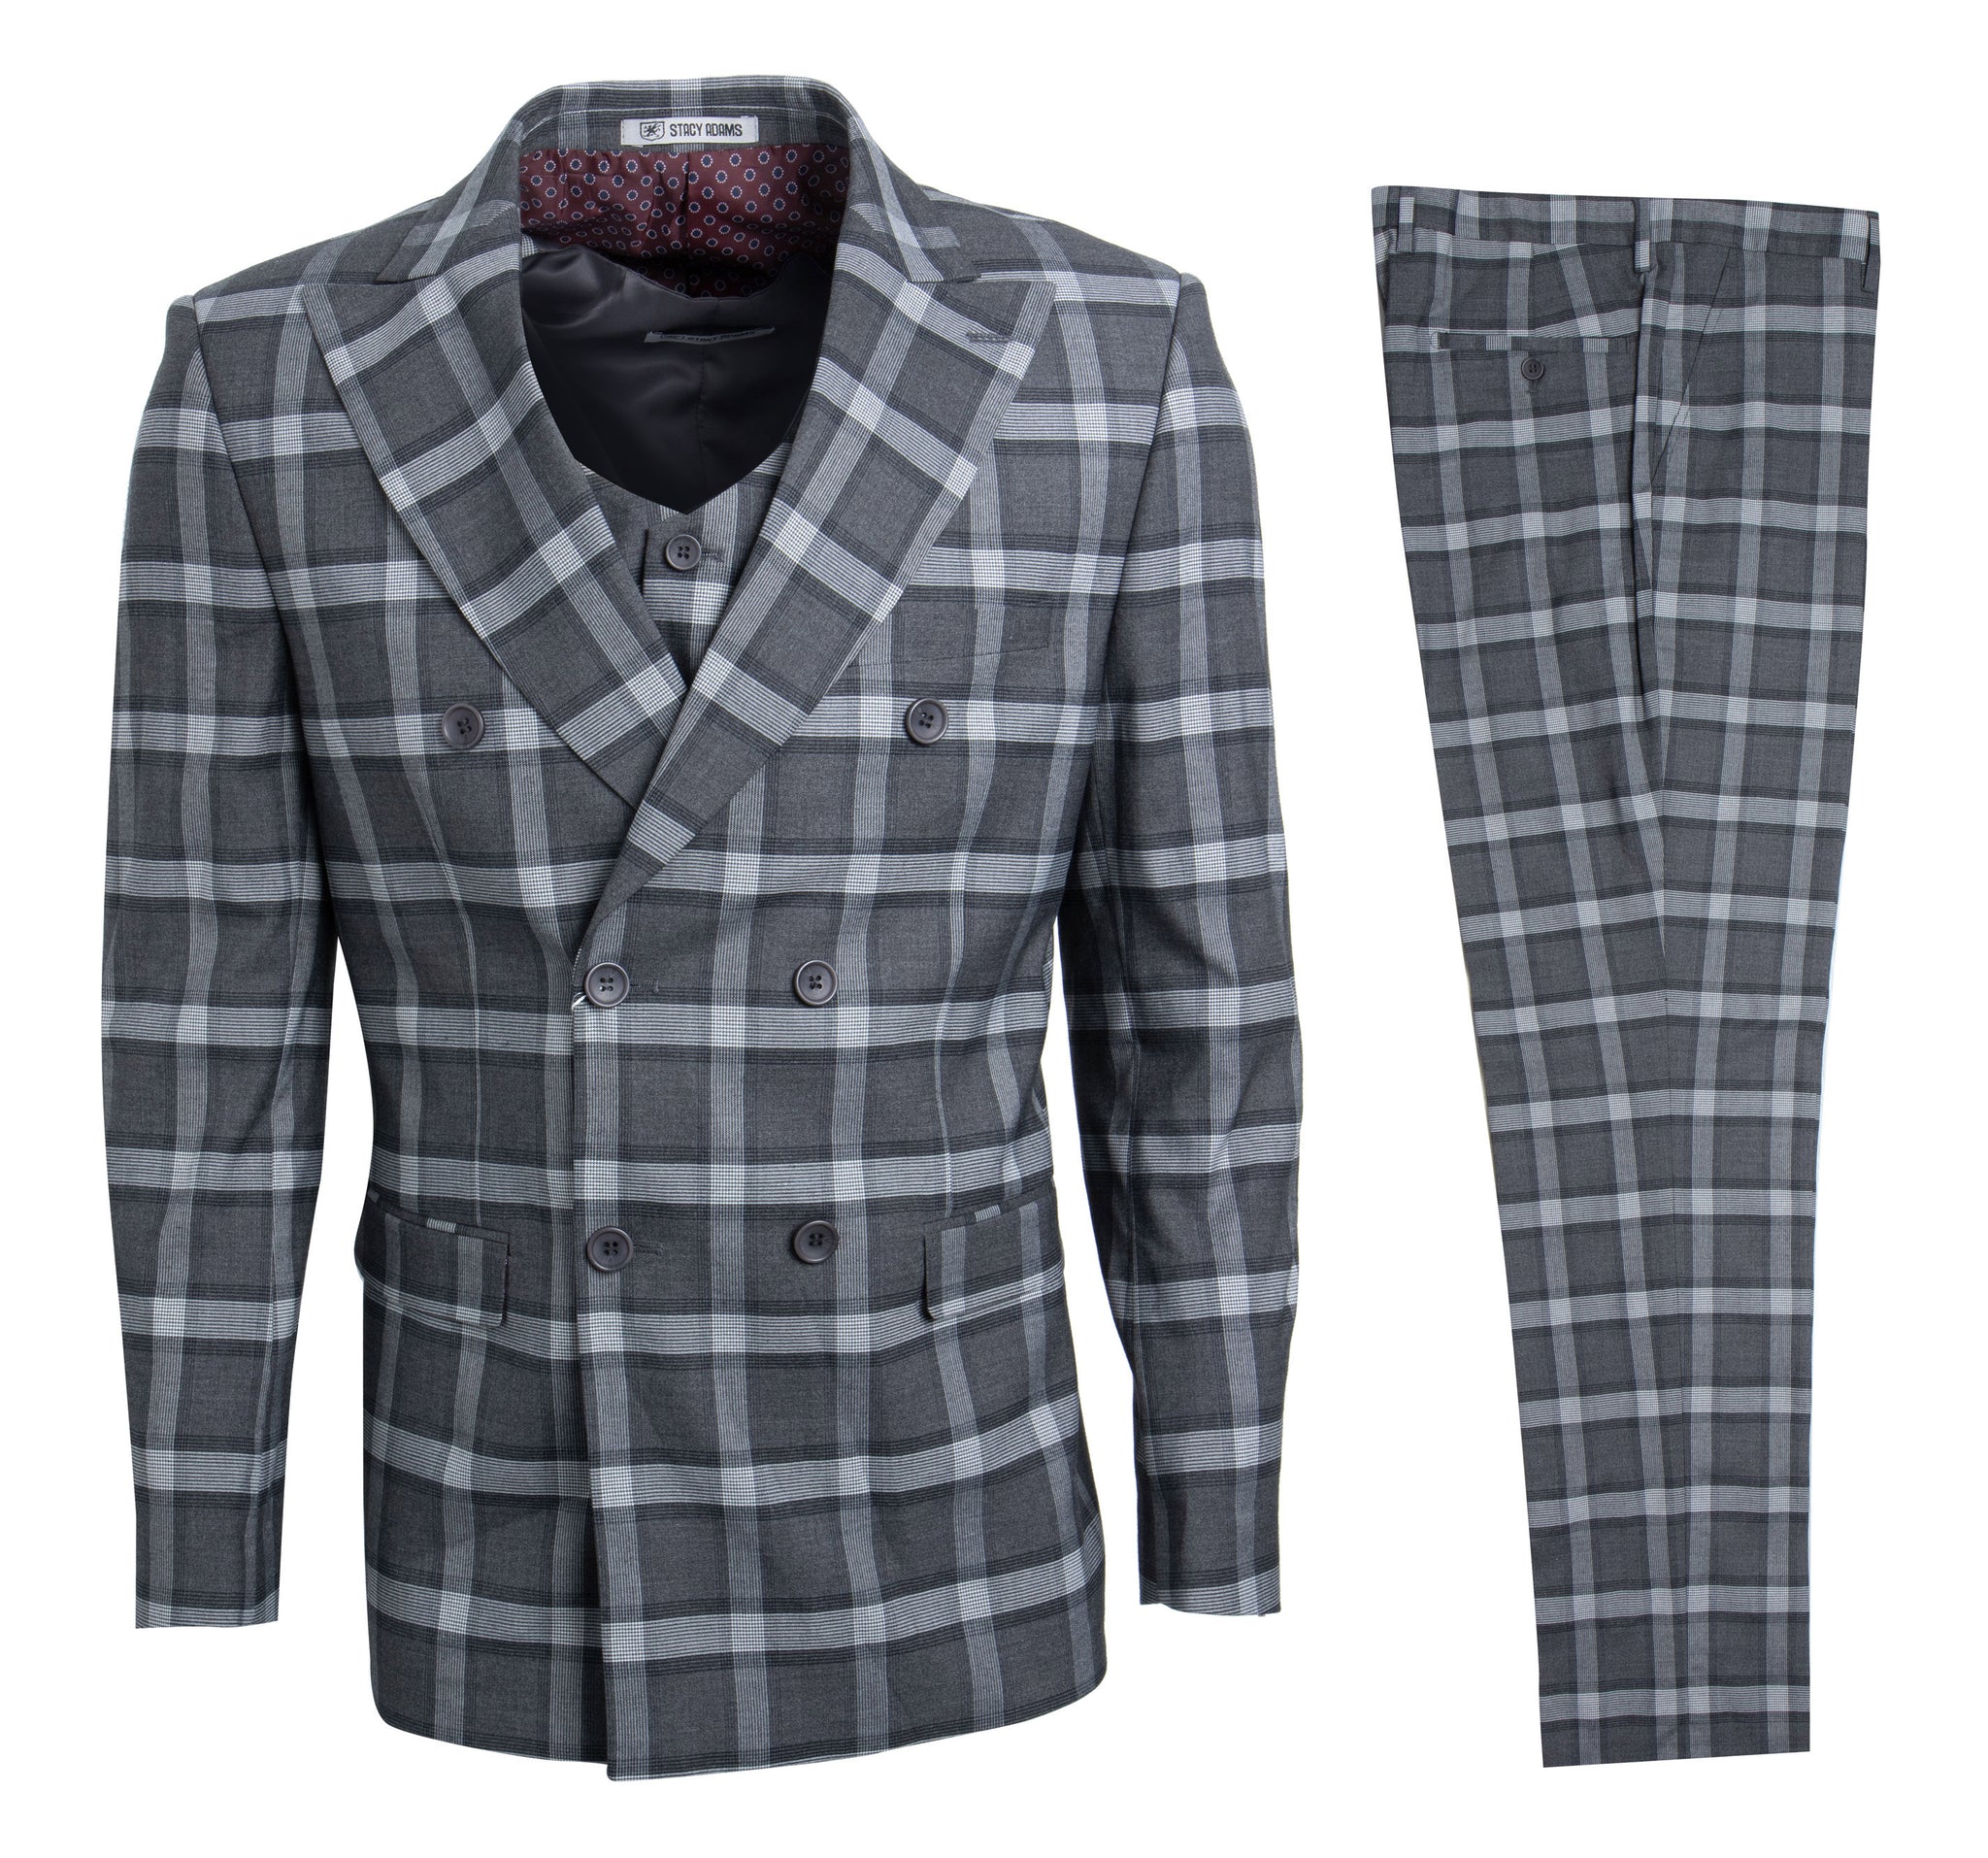 Black / Grey Stacy Adams Men's Suit - Perfect for Every Occasion